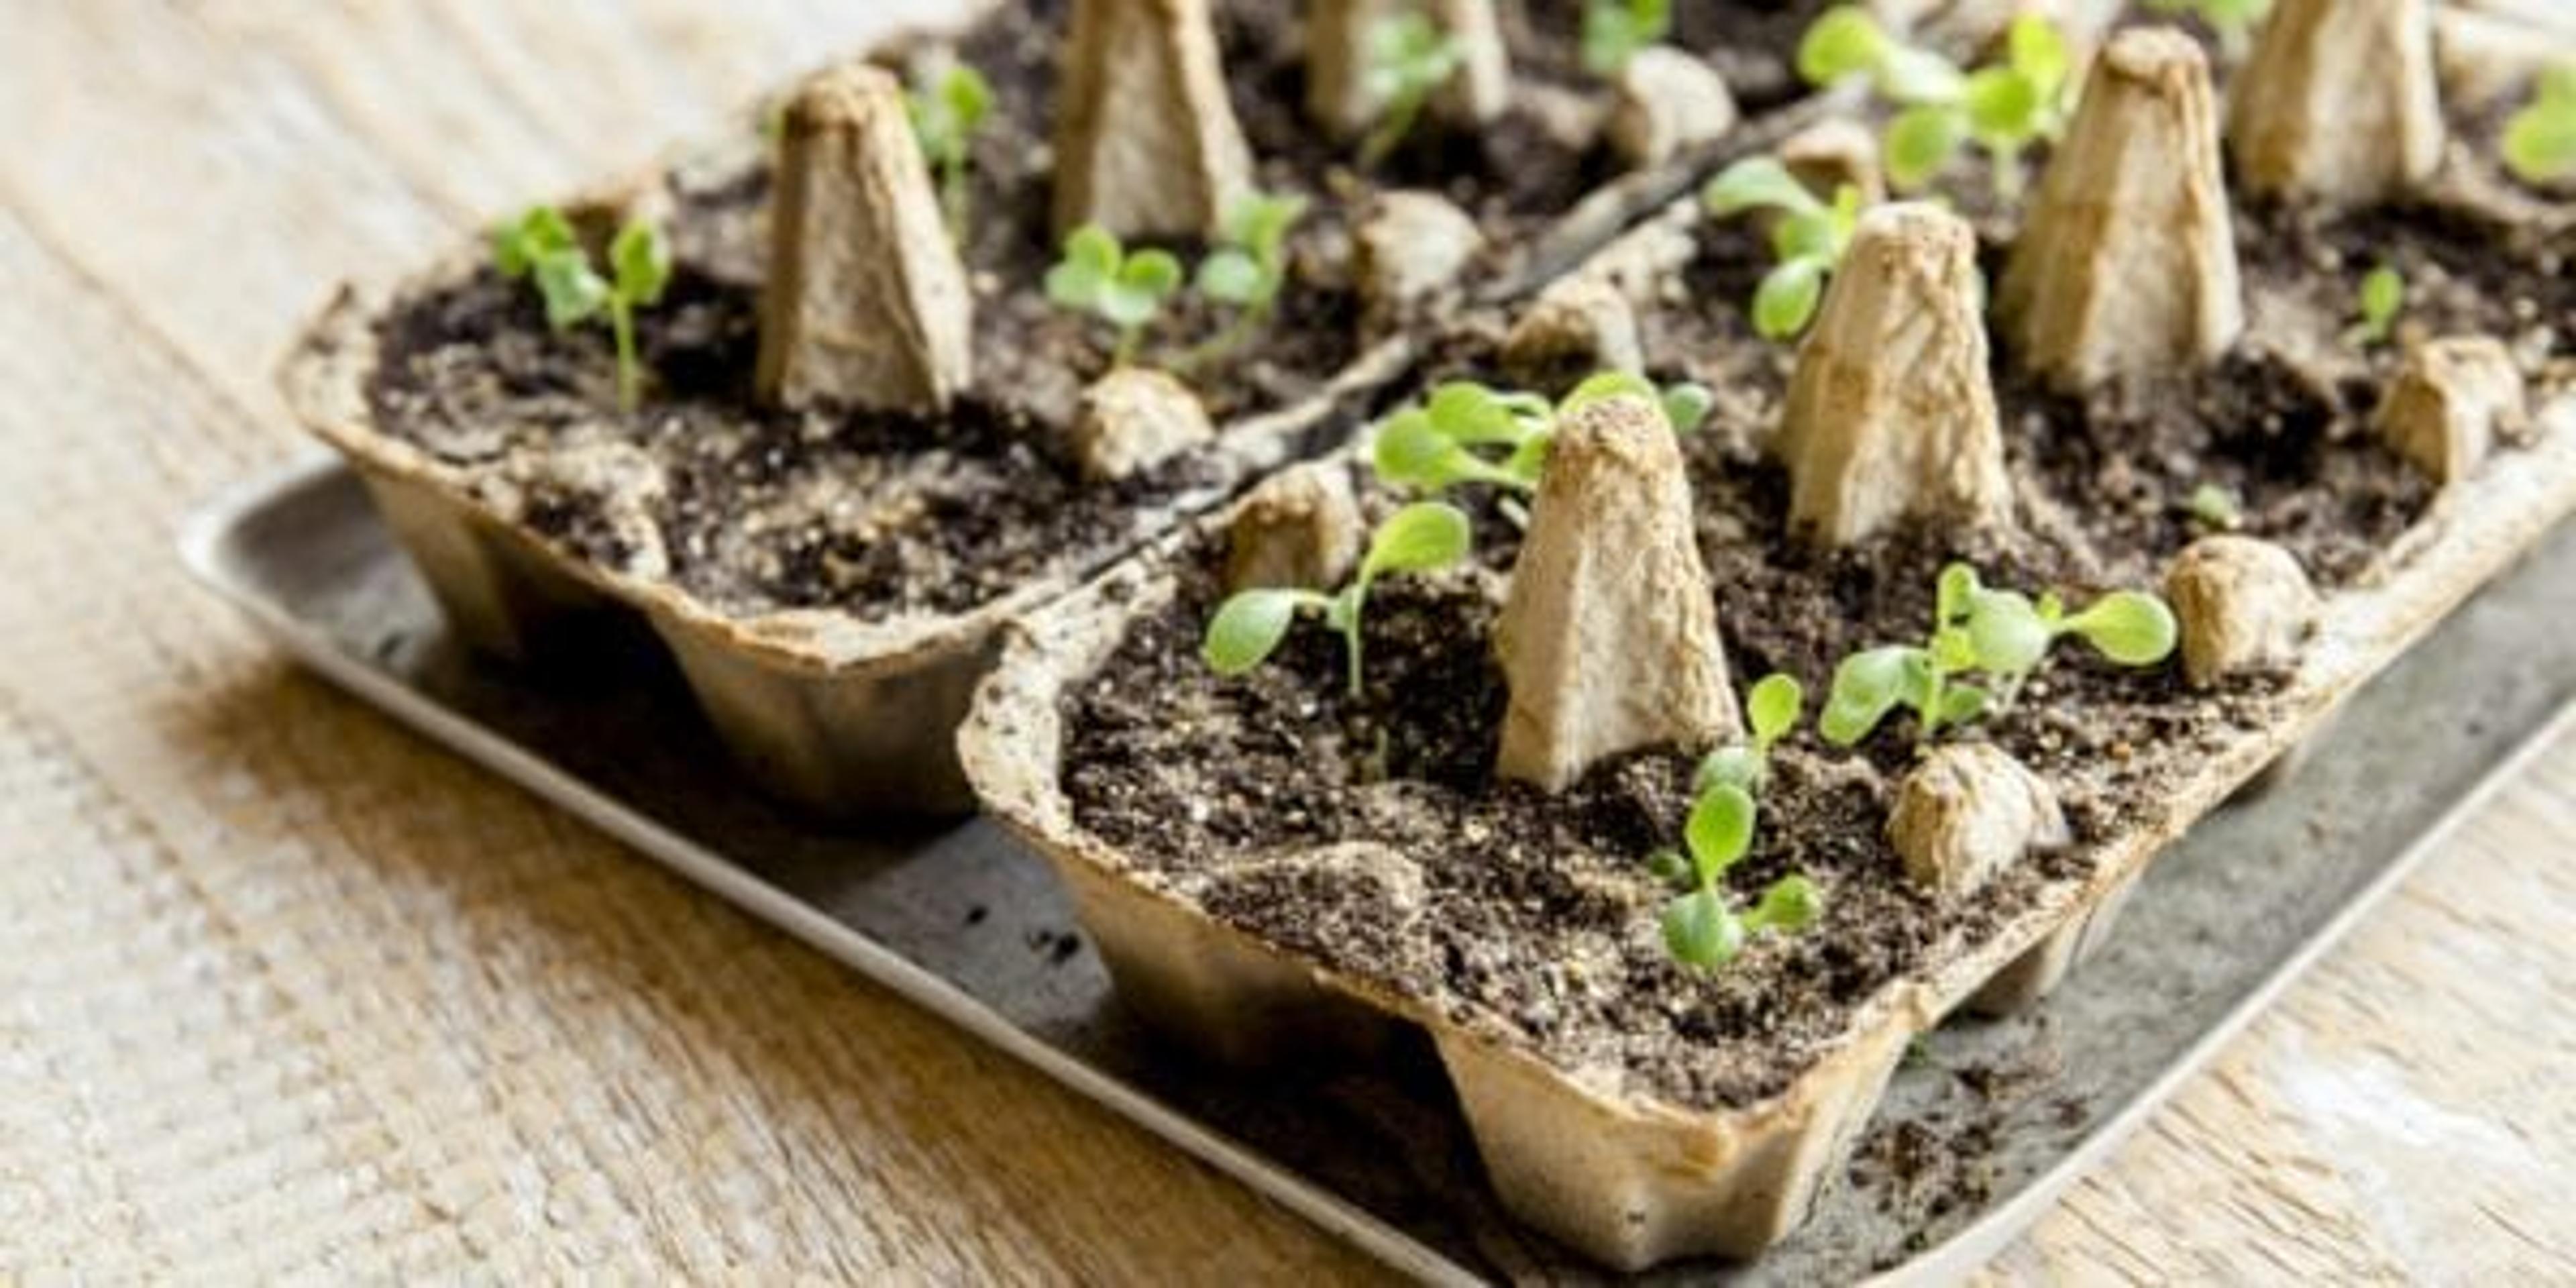 Small plats growing in carton chicken egg box in black soil. Break off the biodegradable paper cup and plant in soil outdoors. Reuse concept